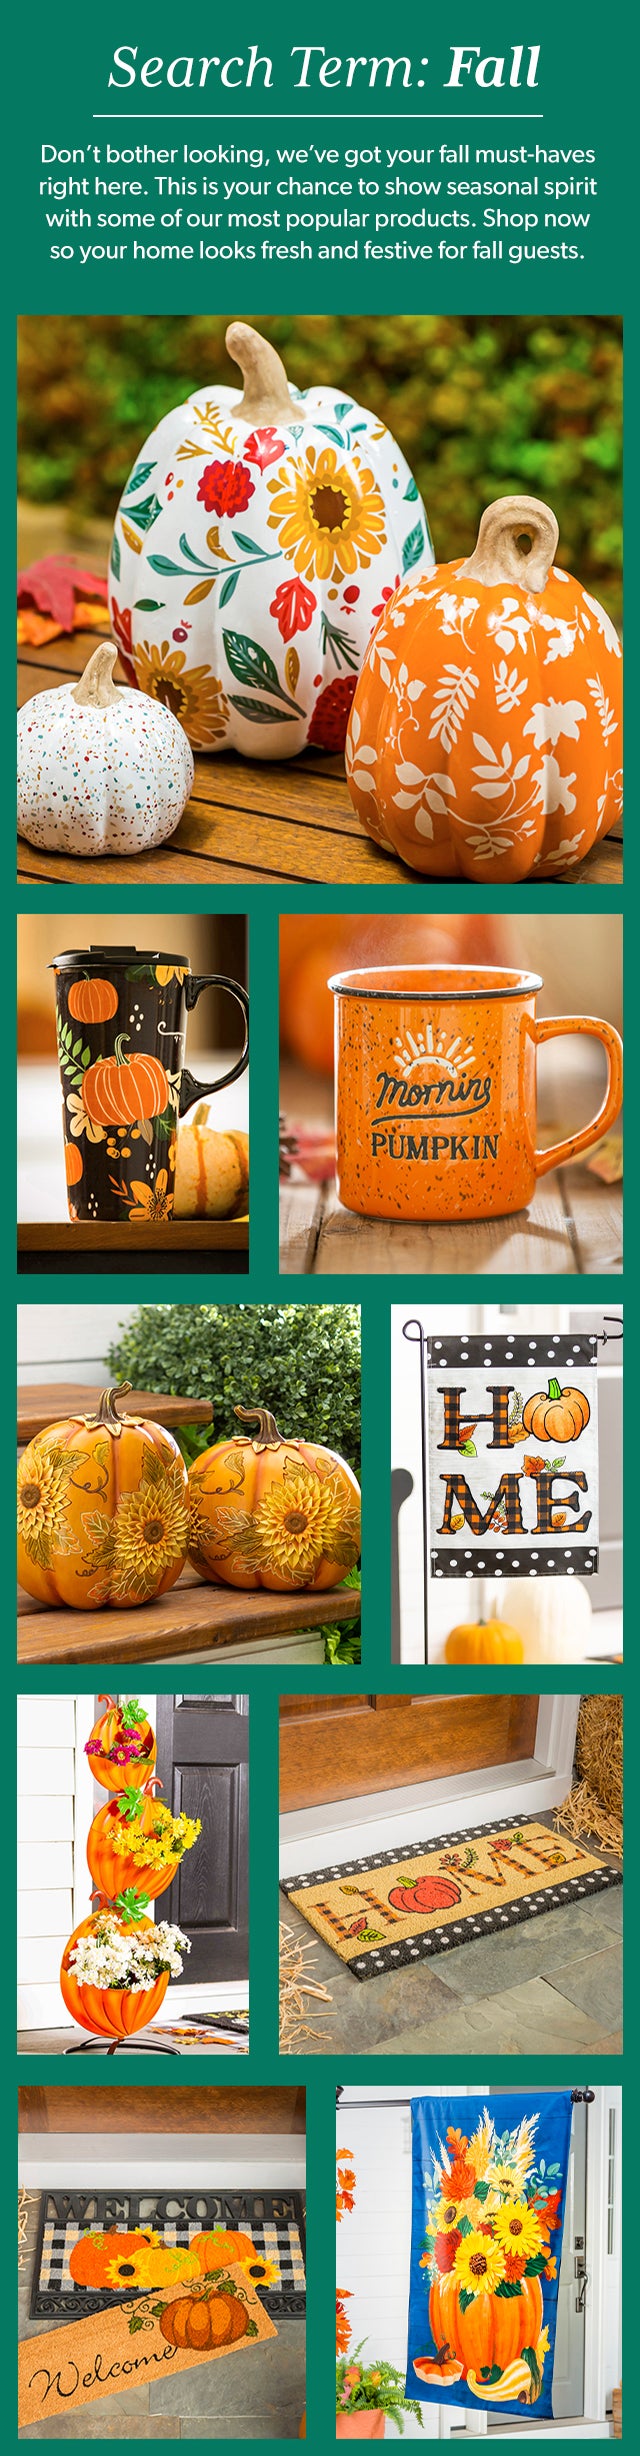 Search Term: Fall Don’t bother looking, we’ve got your fall must-haves right here. This is your chance to show seasonal spirit with some of our most popular products. Shop now so your home looks fresh and festive for fall guests. 